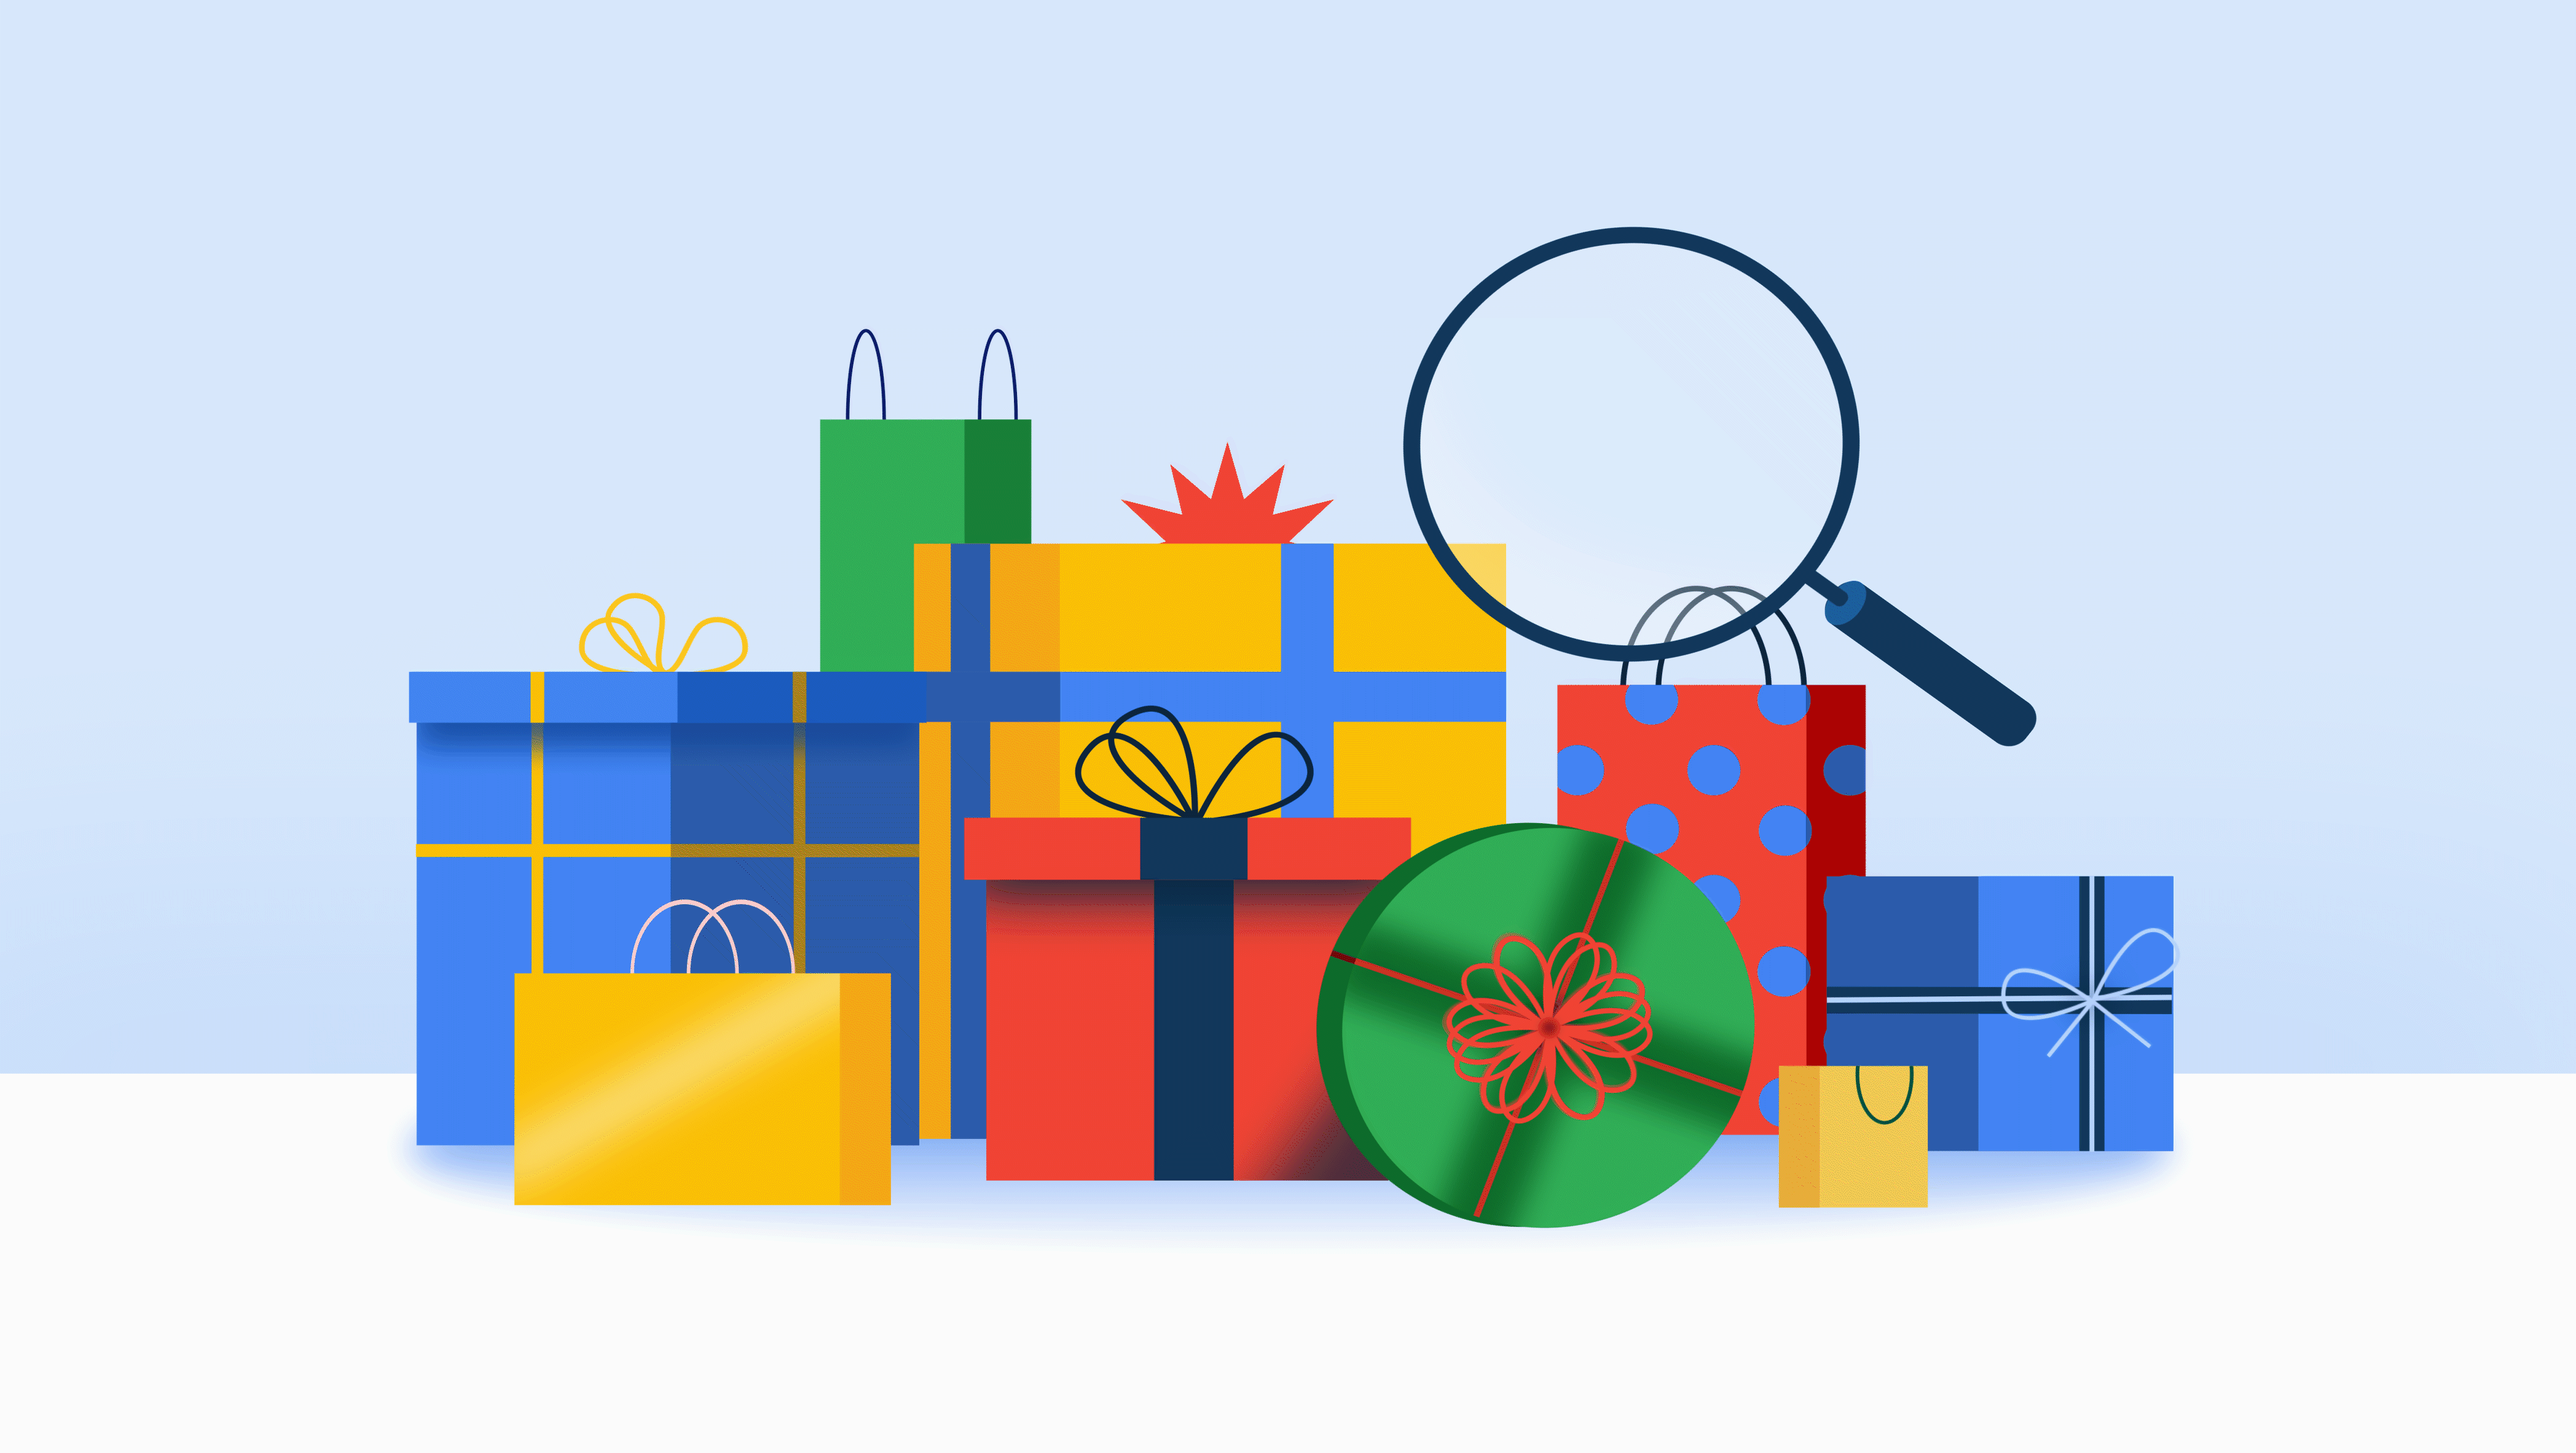 Article's hero media: Illustration of gifts wrapped up for holiday gift-giving